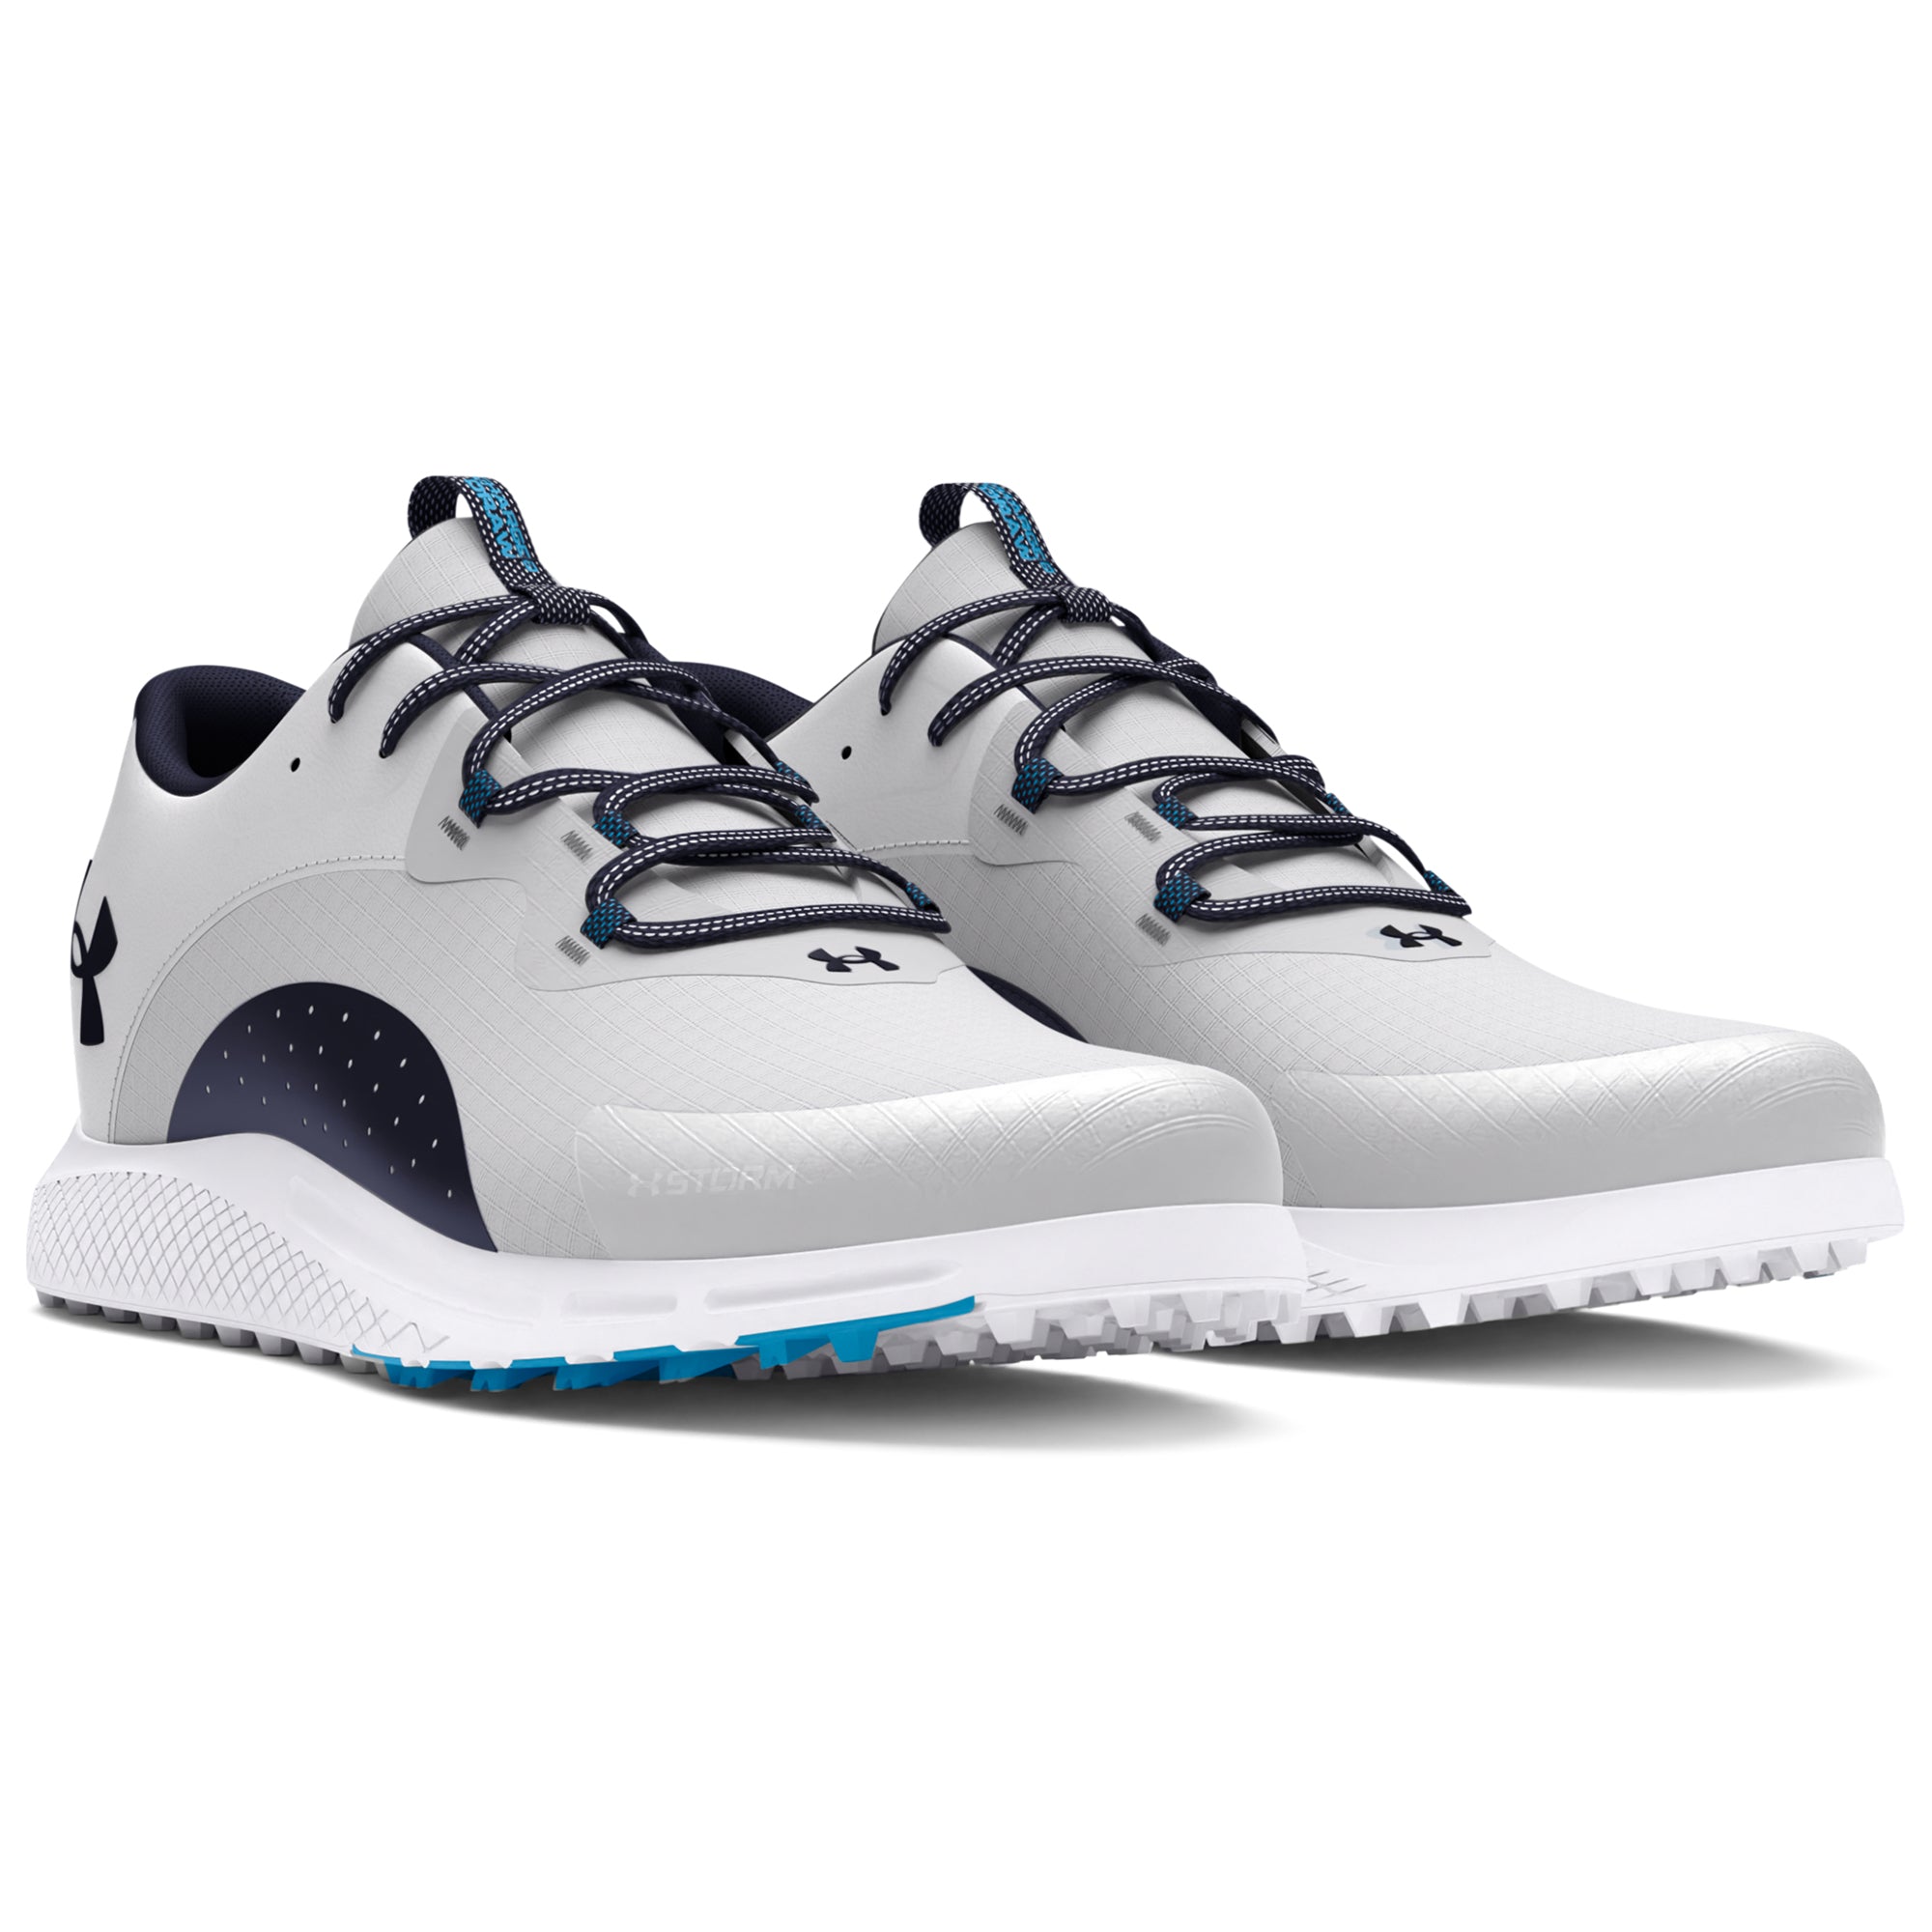 Under Armour Charged Draw 2 SL Golf Shoes